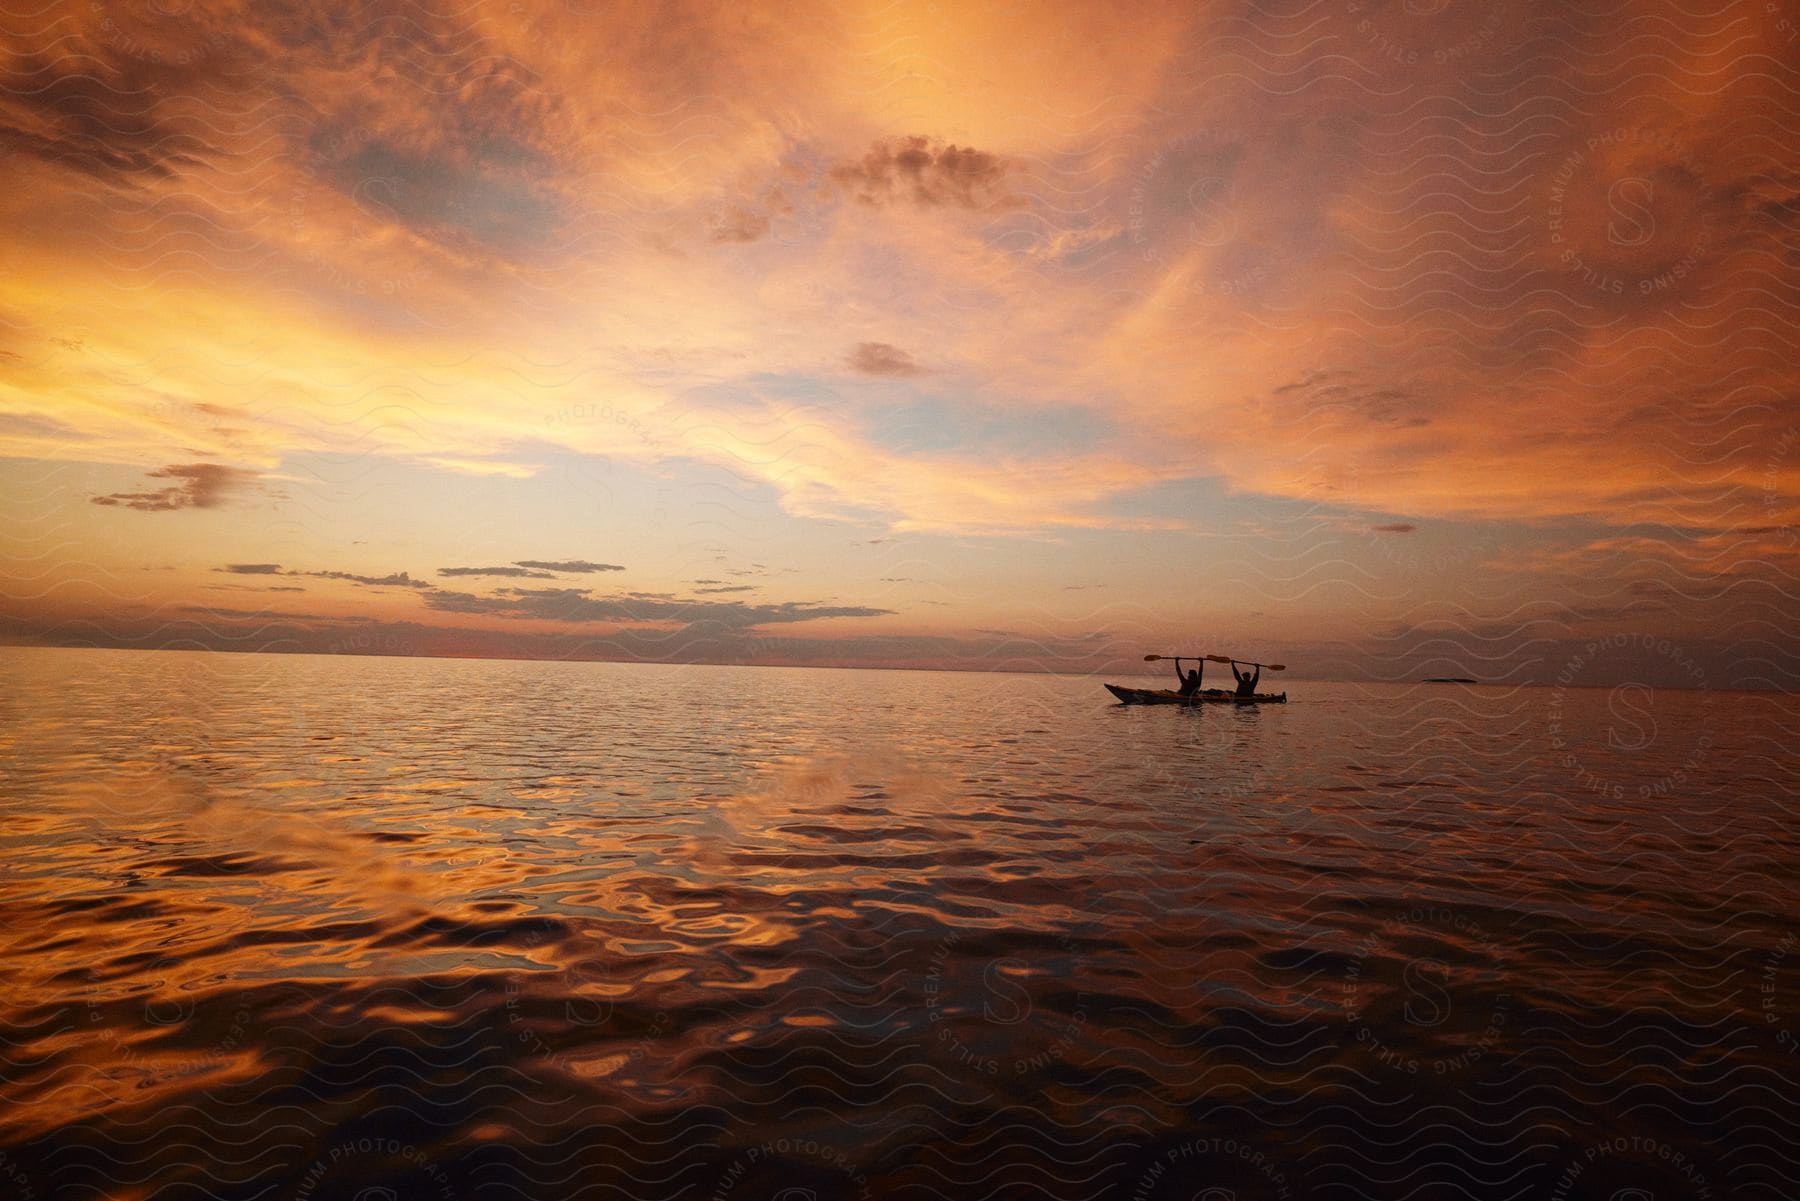 Silhouette of two men sitting in a canoe holding up their oars as the sun sets on the horizon